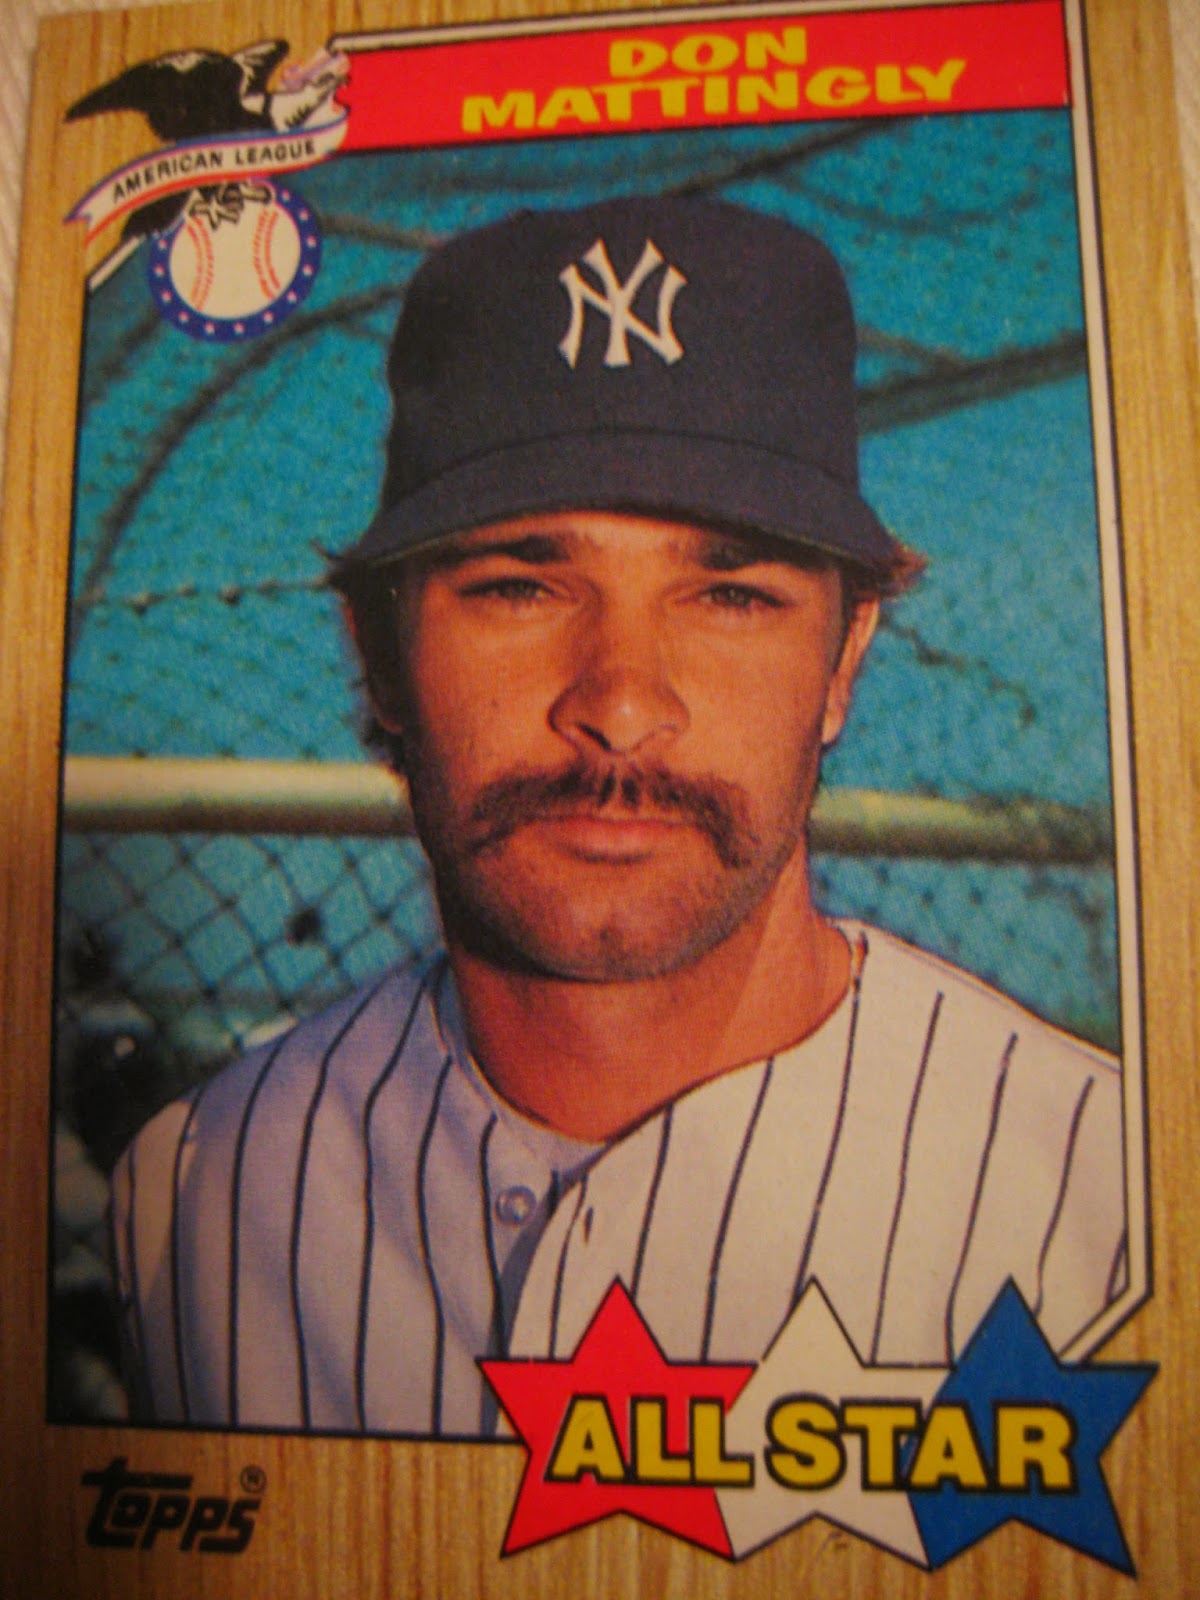 Baseball Cards Come to Life!: Trade with Swing And A Pop-Up1200 x 1600